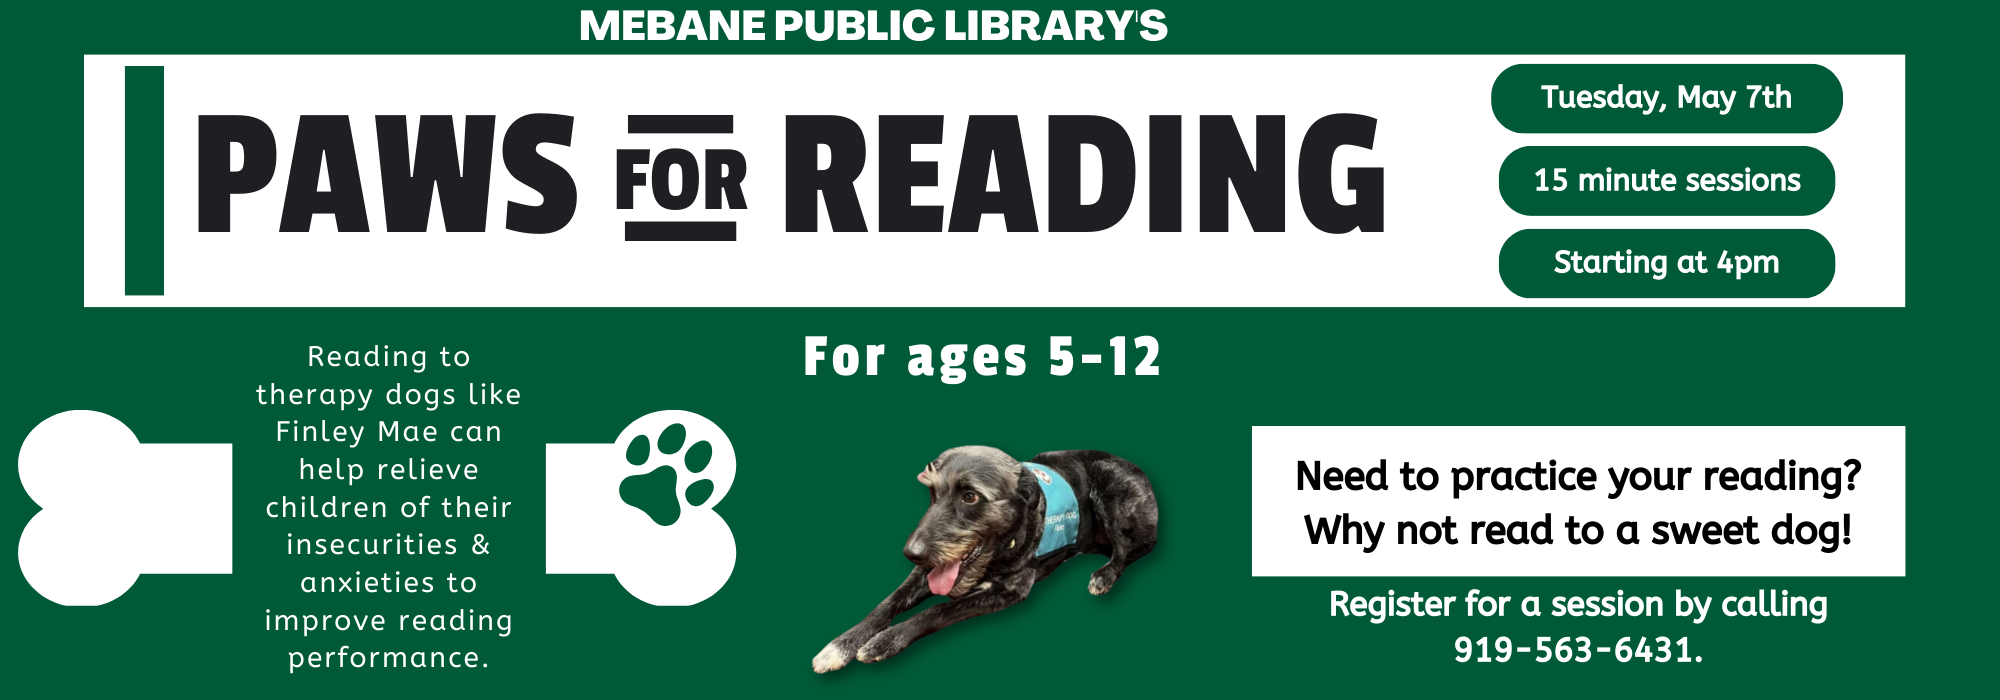 5.7 at 4 pm - Paws for Reading at Mebane